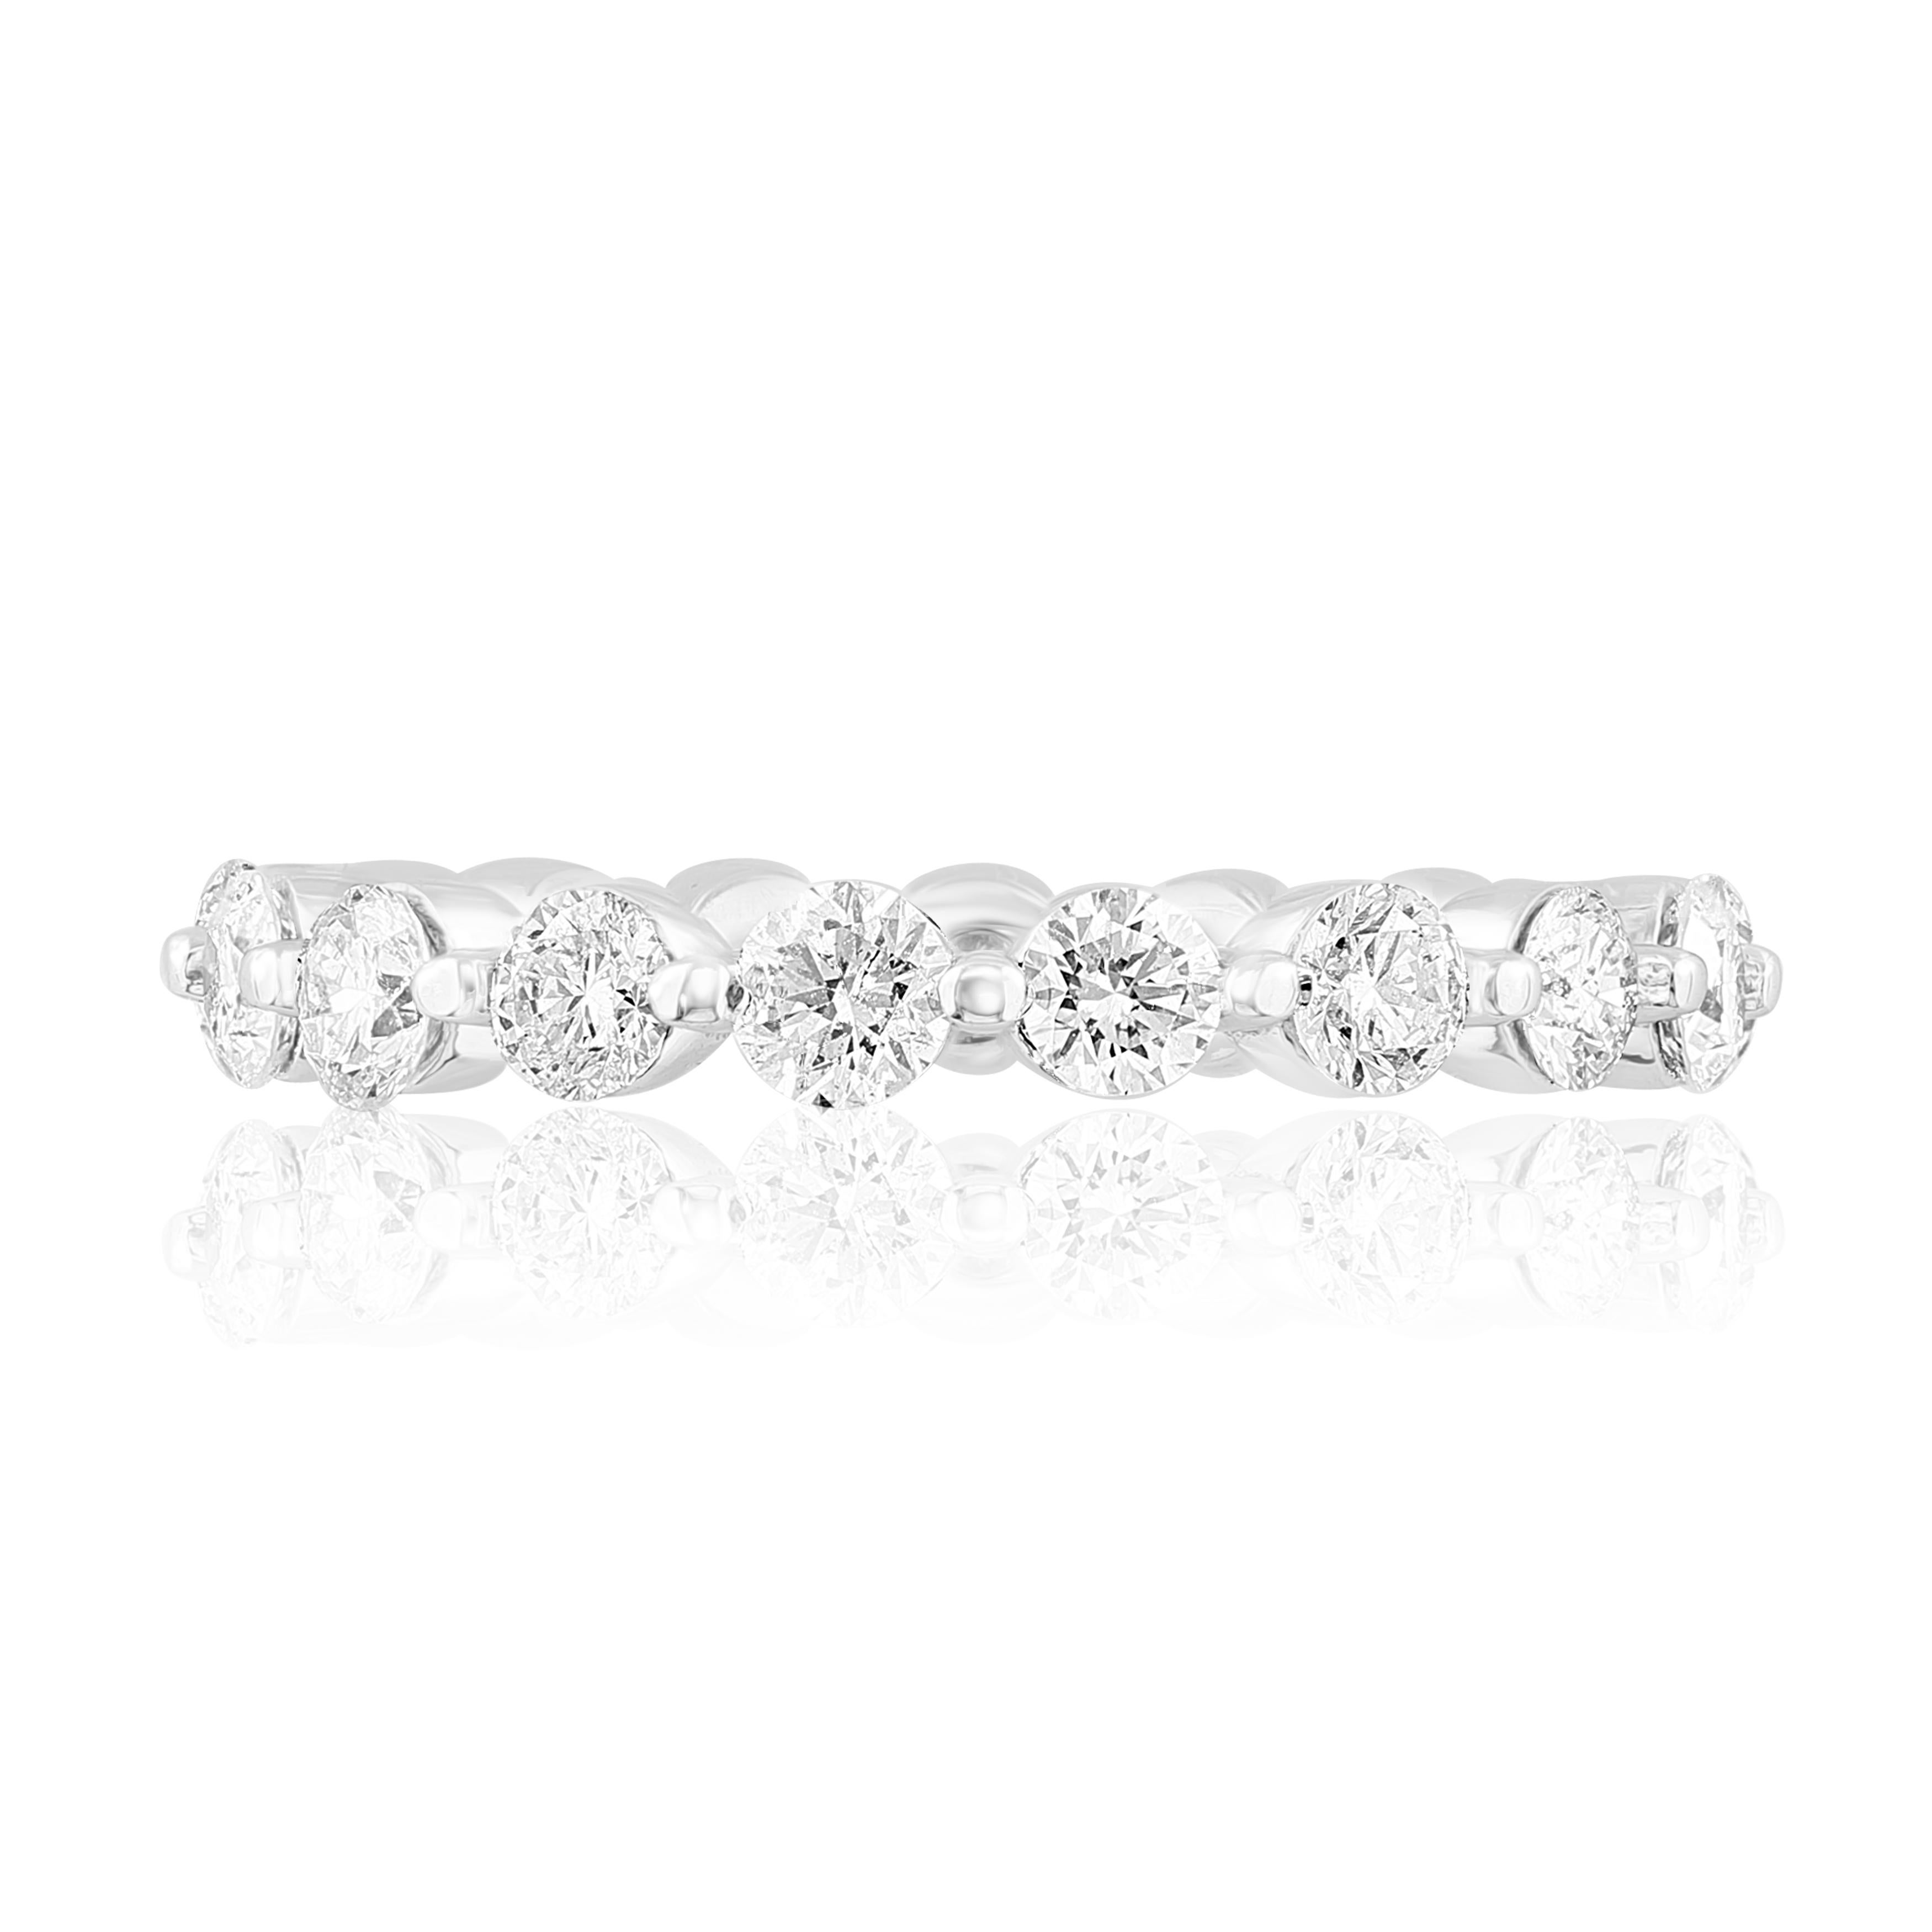 A classic and timeless eternity band style showcasing a row of round brilliant diamonds set in a shared prong 14K white gold mounting. 15 Diamonds weigh 2.30 carats. Size 6.5 US.

Style is available in different price ranges. Prices are based on